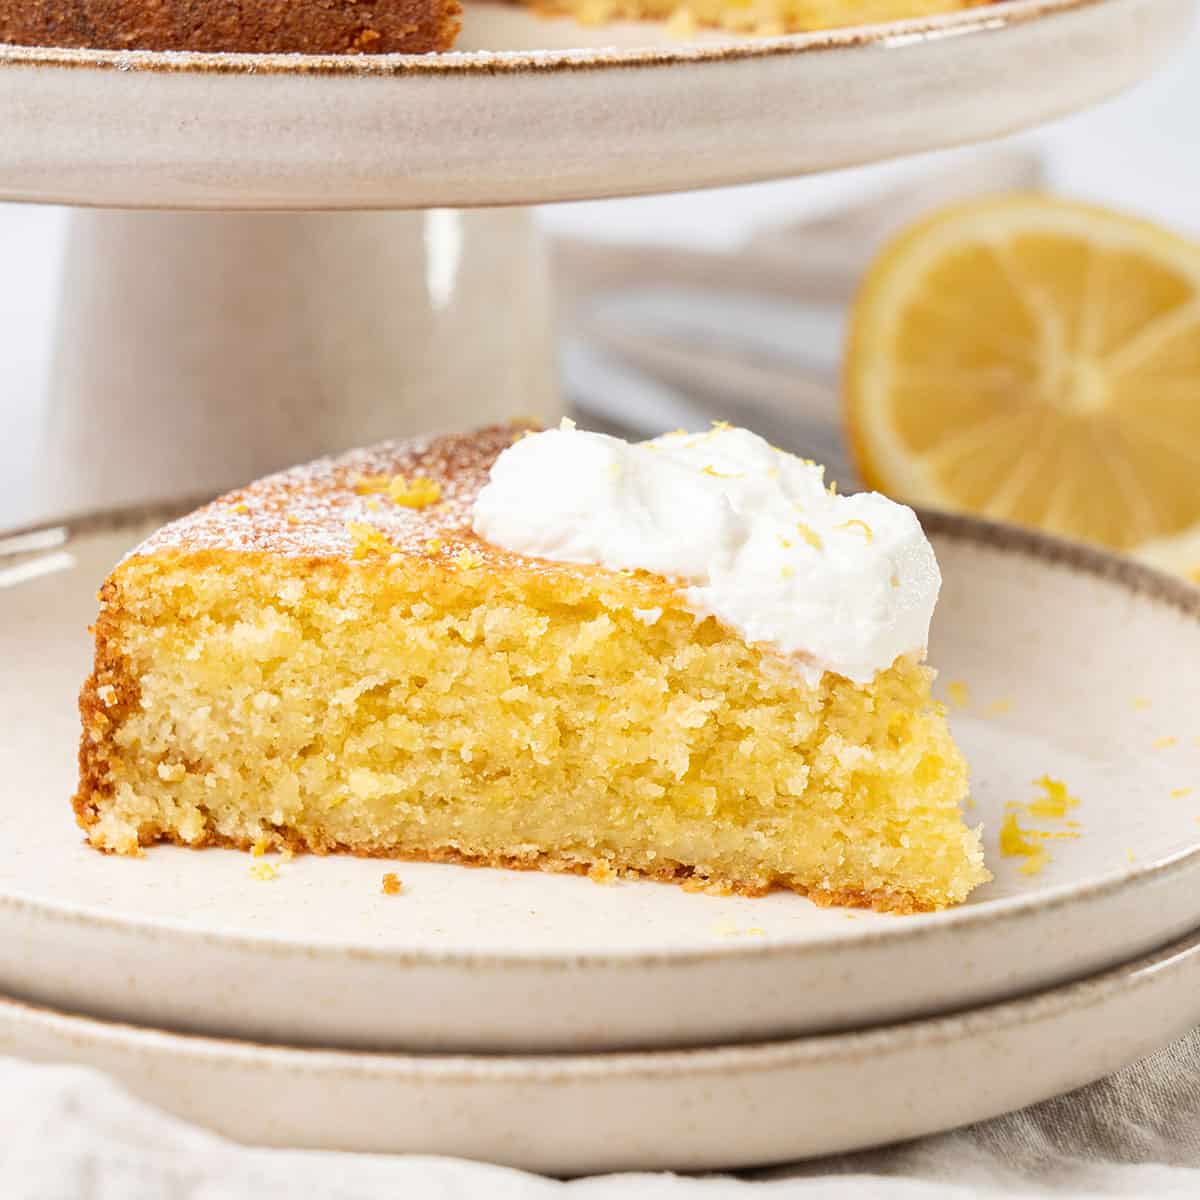 <p>This delicious, easy <a href="https://www.spatuladesserts.com/italian-lemon-ricotta-cake/">Italian Lemon ricotta cake</a> is by far one of the best lemon desserts you will ever try. Made with fresh lemons, creamy ricotta cheese, and a hint of vanilla extract, it has a gently sweet, citrusy flavor and an irresistible melt-in-your-mouth texture that resembles a moist sponge cake.</p><p><strong>Go to the recipe: <a href="https://www.spatuladesserts.com/italian-lemon-ricotta-cake/">Italian Lemon Ricotta Cake</a></strong></p>